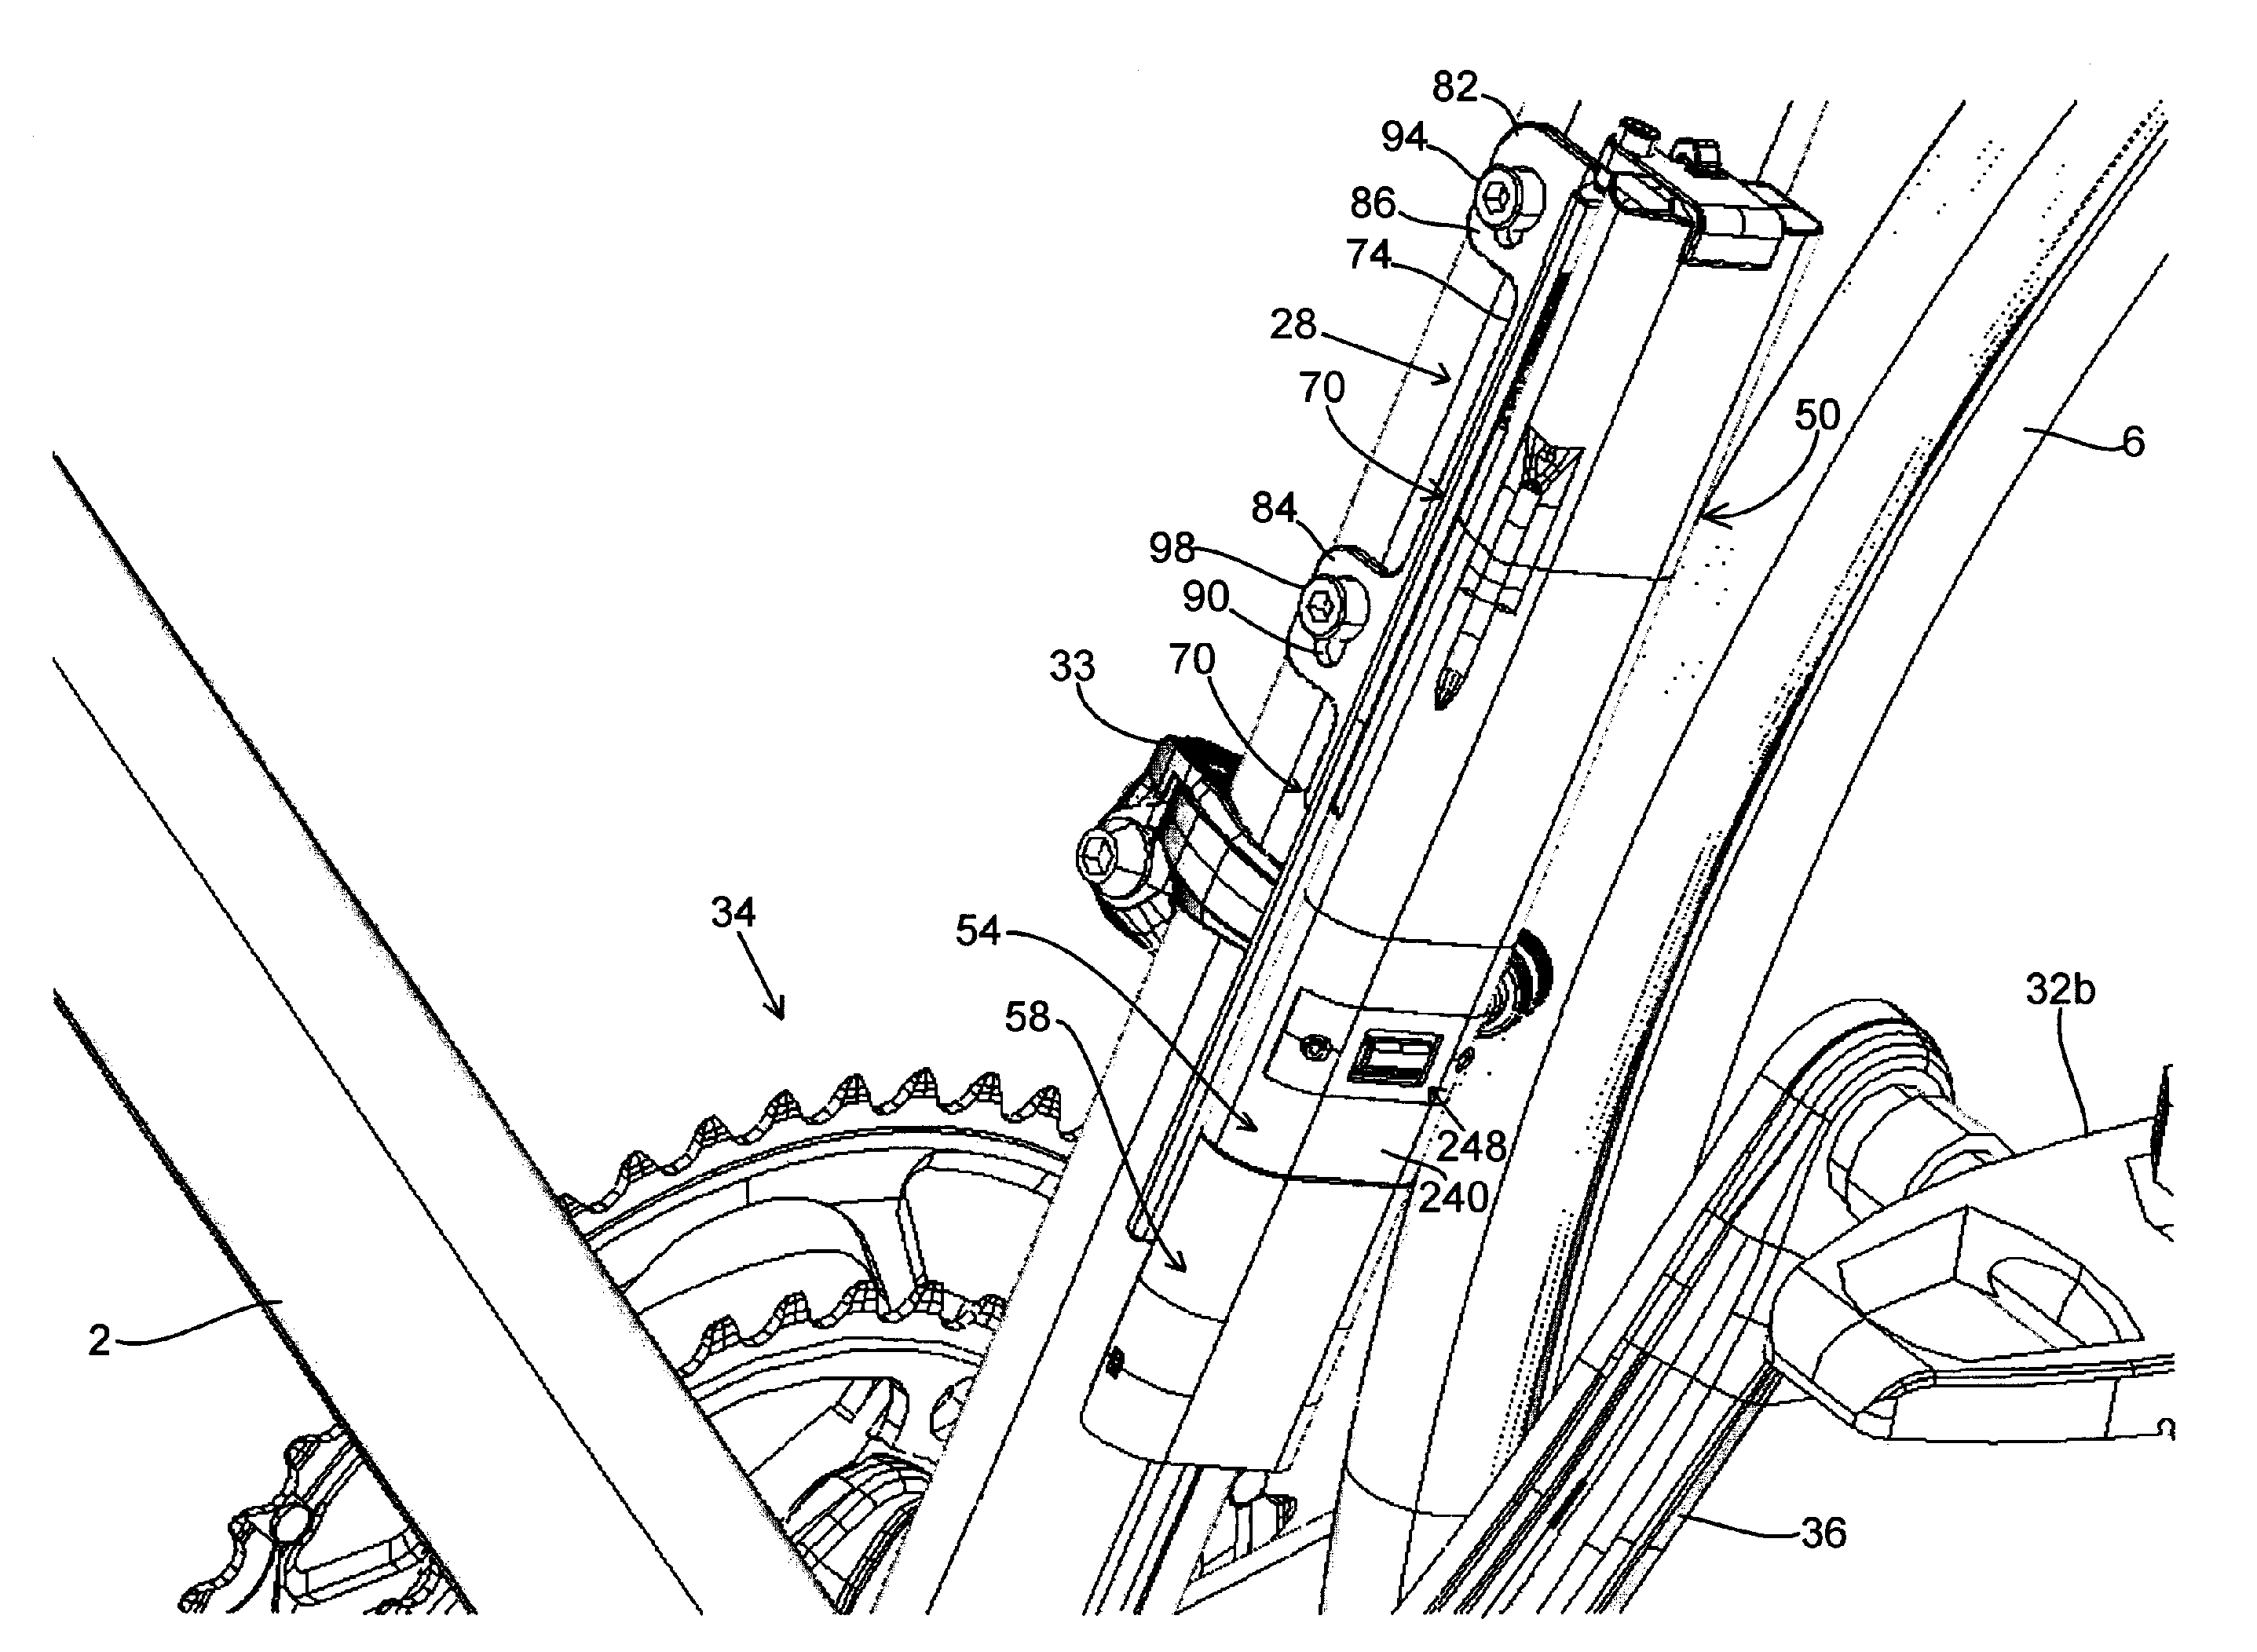 Apparatus for mounting an electrical component to a bicycle